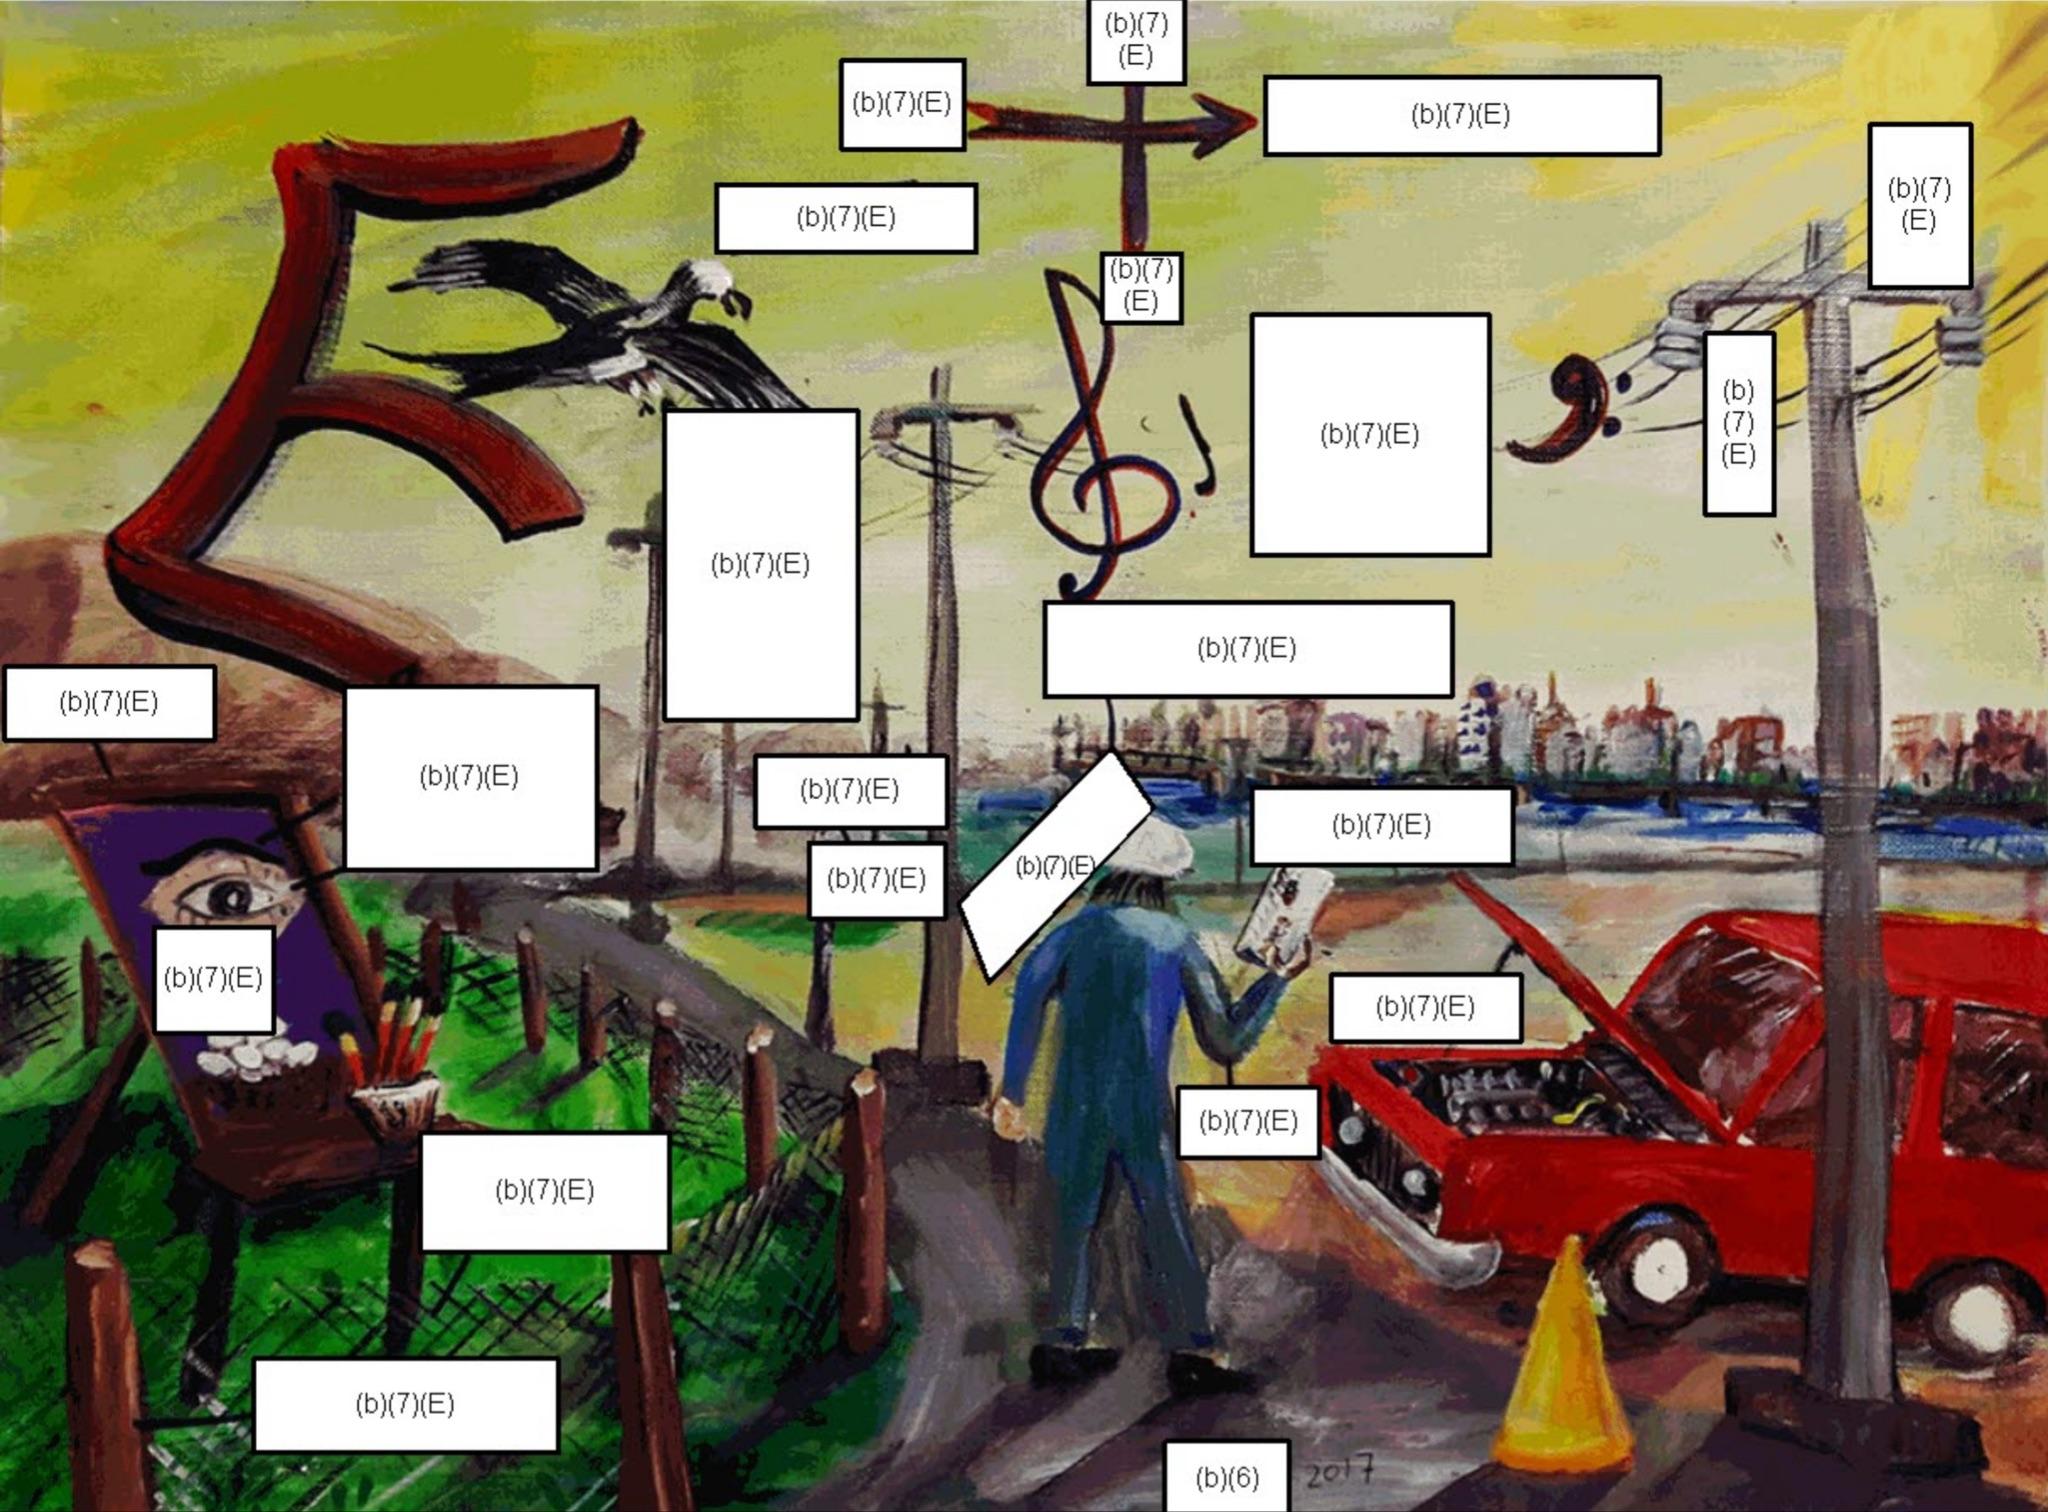 A surreal painting of music notes floating over a road where a man apparently is working on a car while next door is a field with art and an eyeball. All across the painting, there 22 redaction boxes labeled b7e